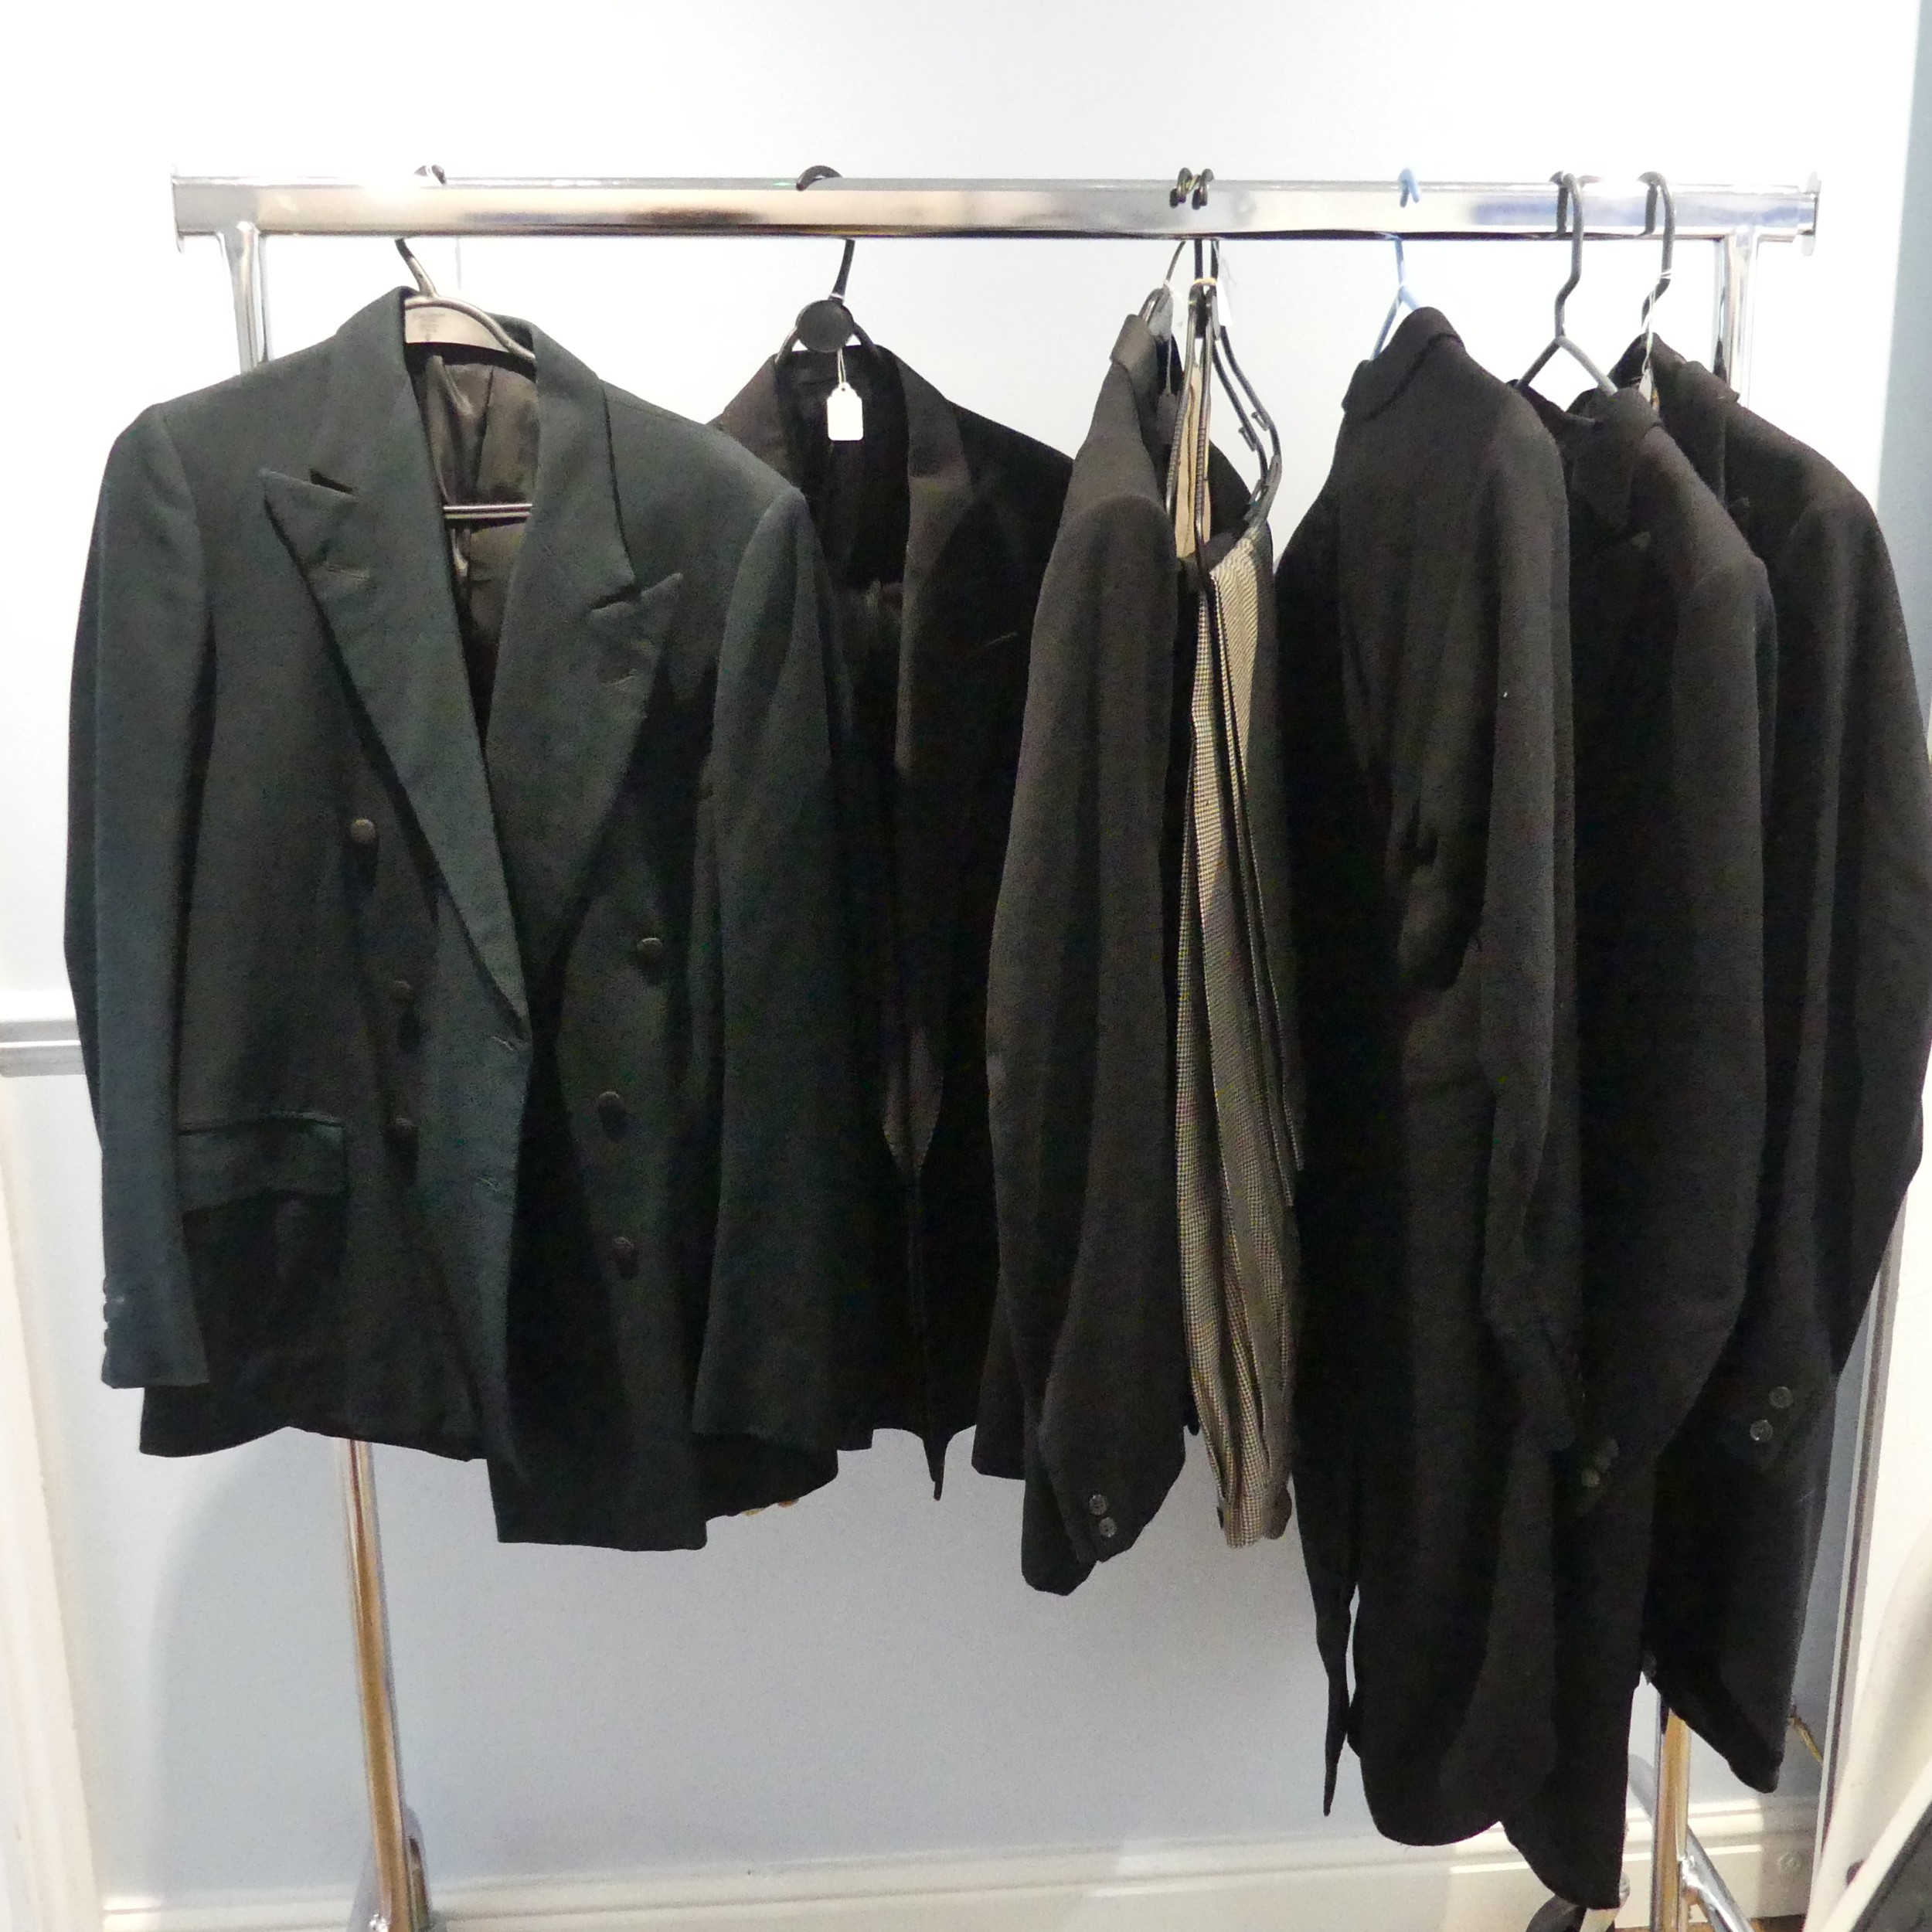 Bespoke Tailoring: early and mid 20th century Men's formal Evening Dress, including three tailcoats, - Image 4 of 6